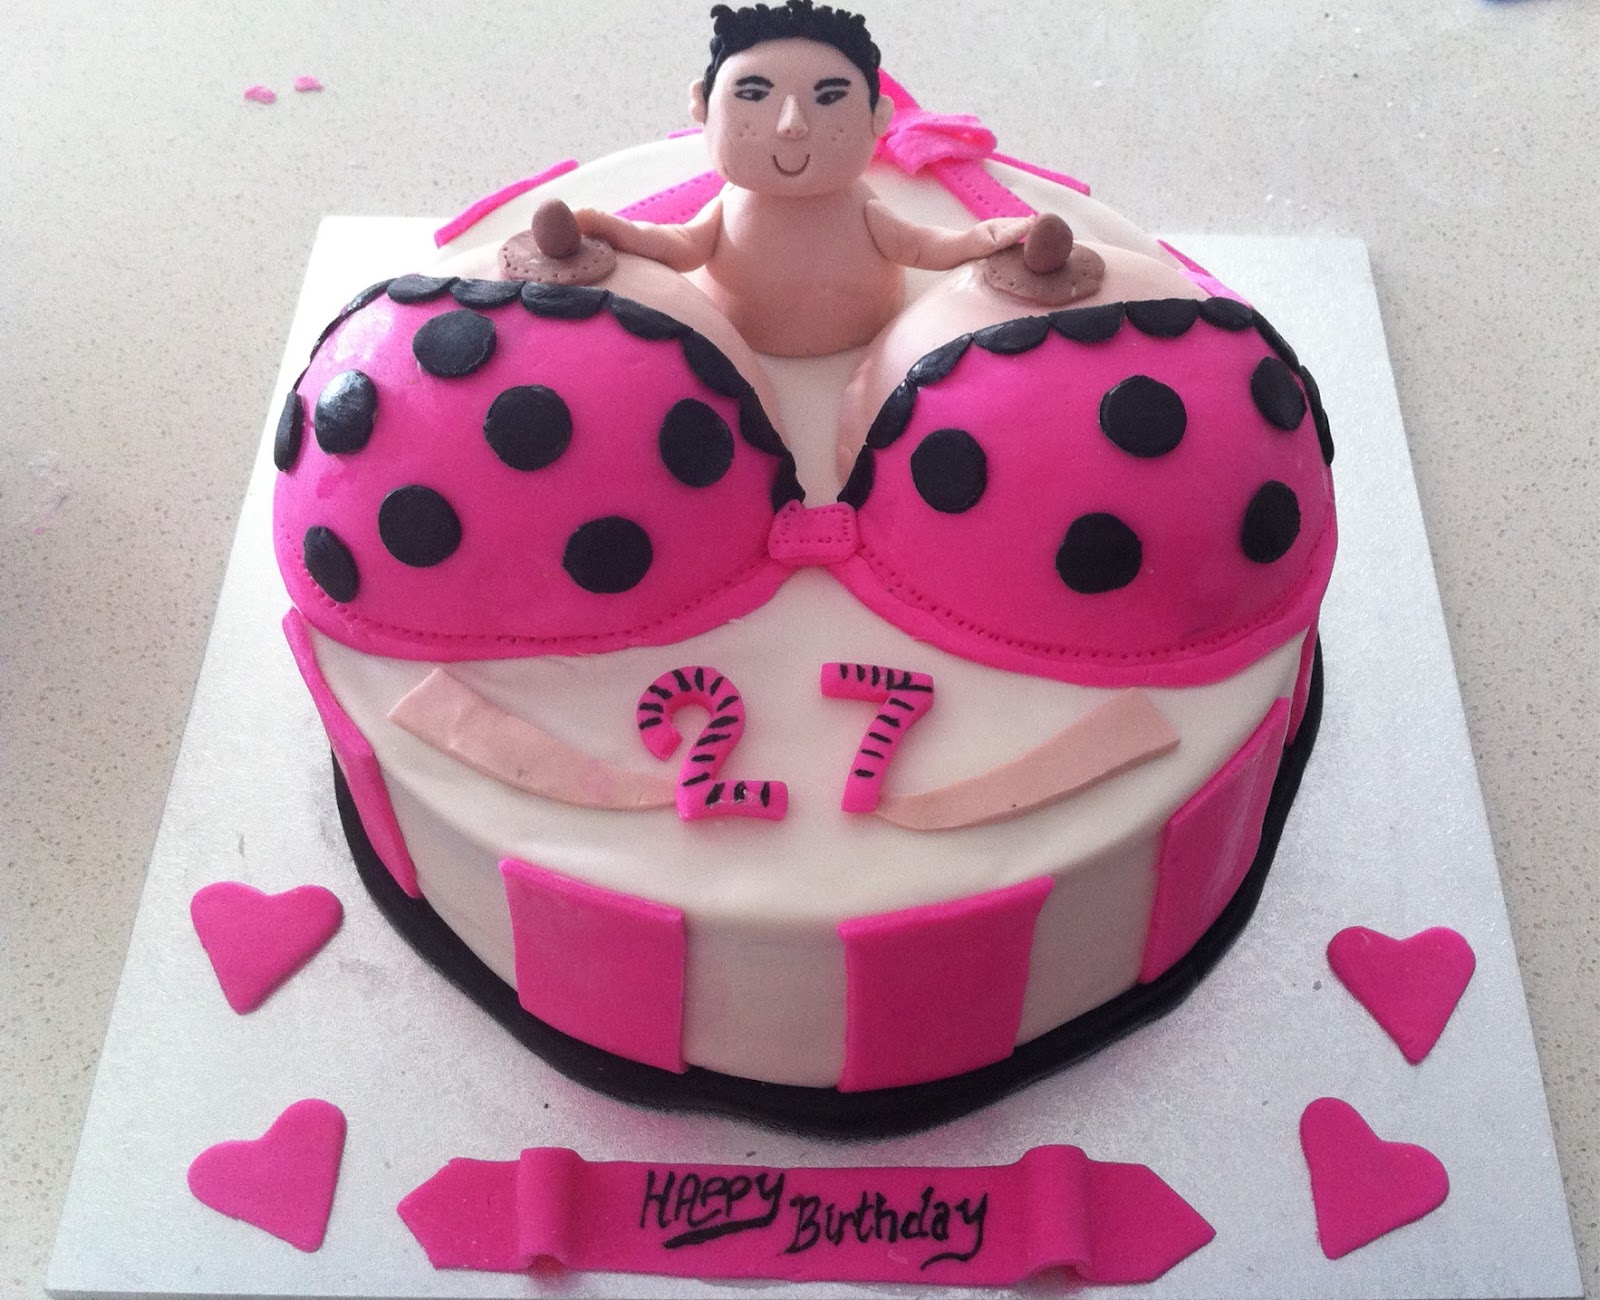 Sexy adult cakes for your birthday, bachelor, or bachelorette party